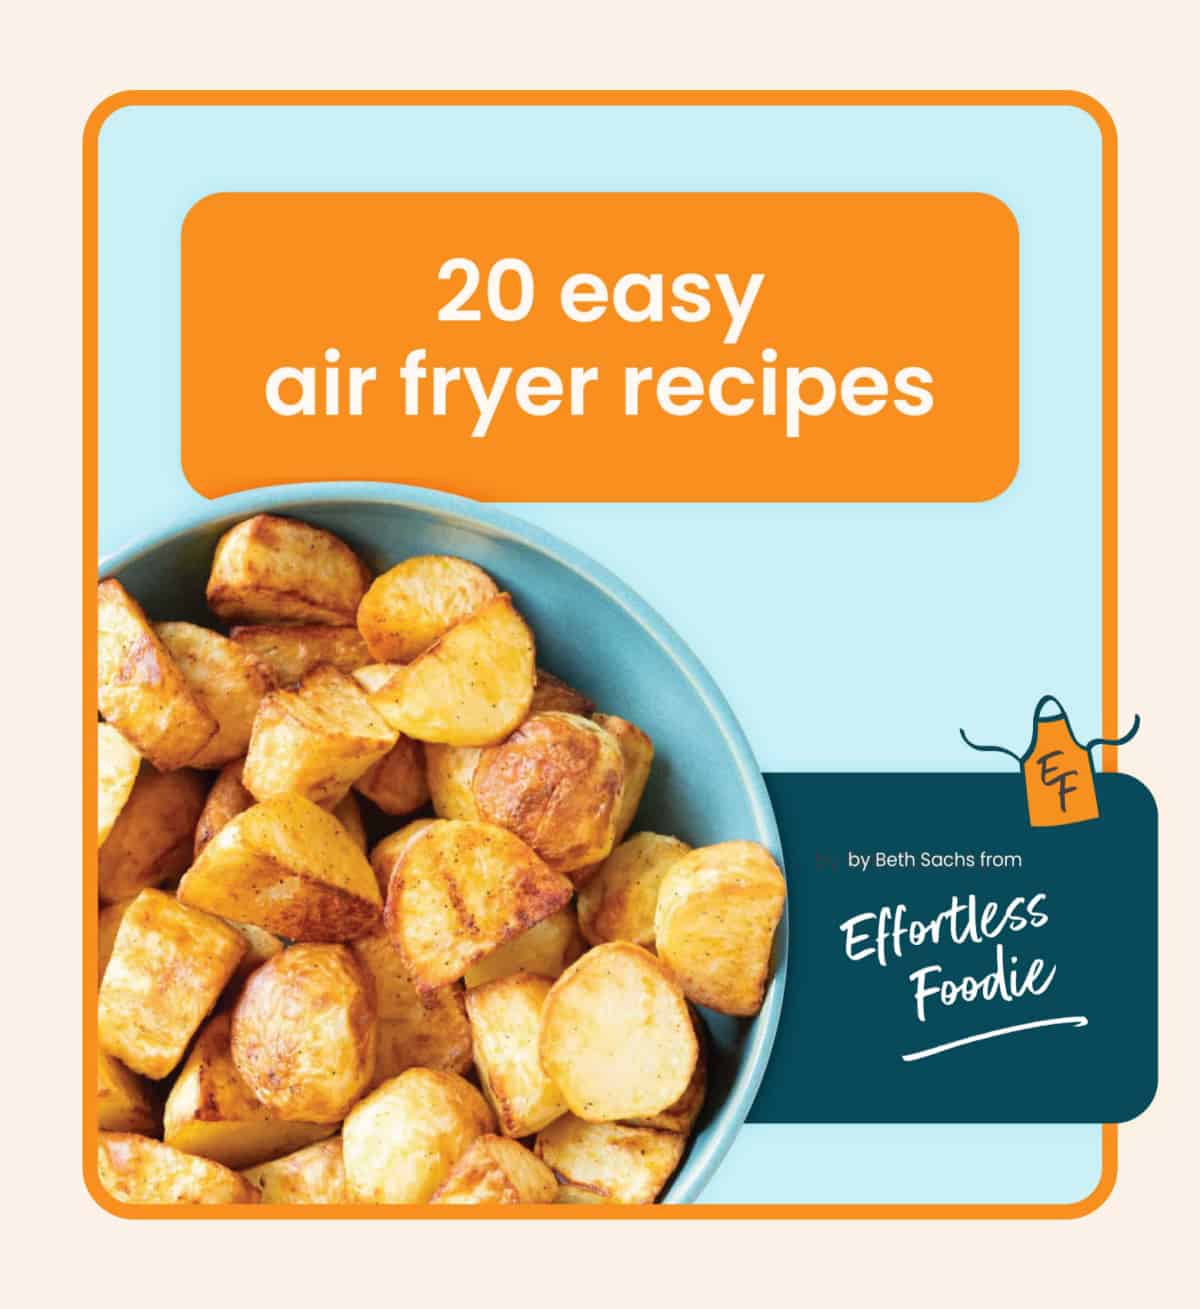 Air fryer recipe ebook front cover.